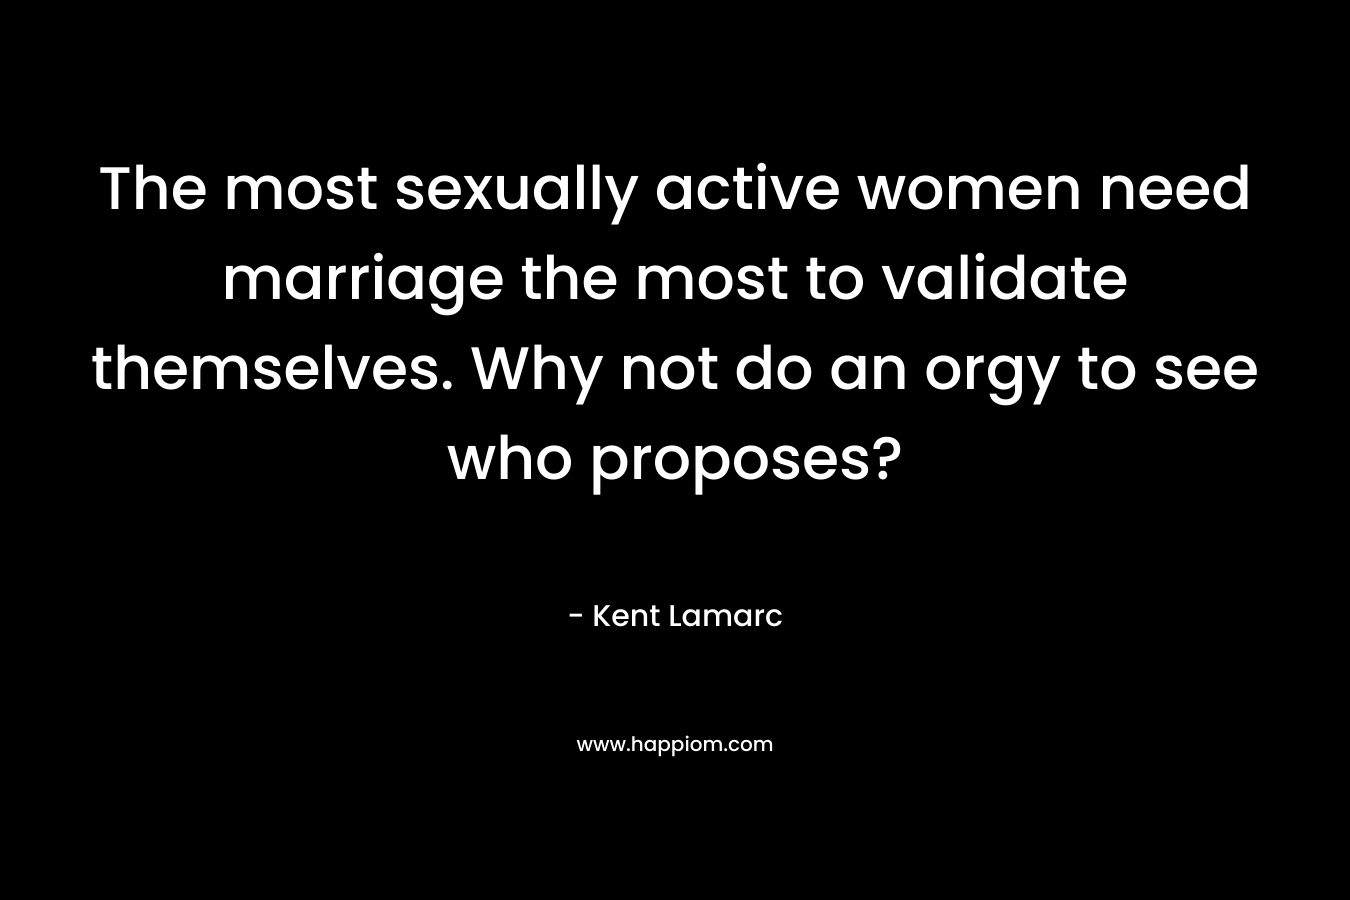 The most sexually active women need marriage the most to validate themselves. Why not do an orgy to see who proposes? – Kent Lamarc